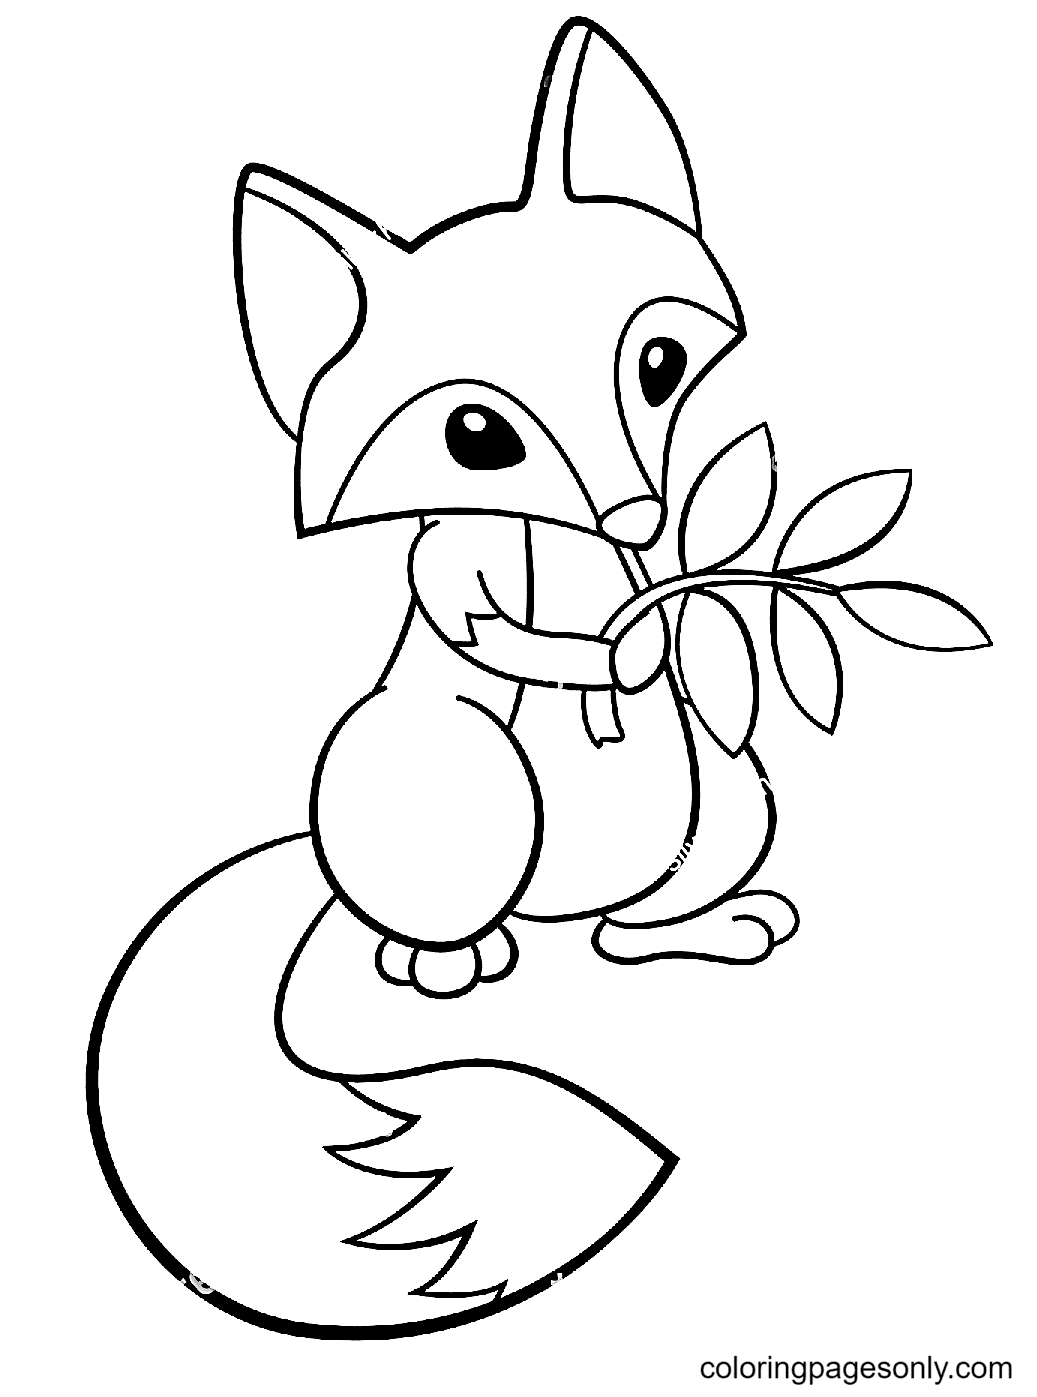 Cute Fox with Autumn Leaf Coloring Page